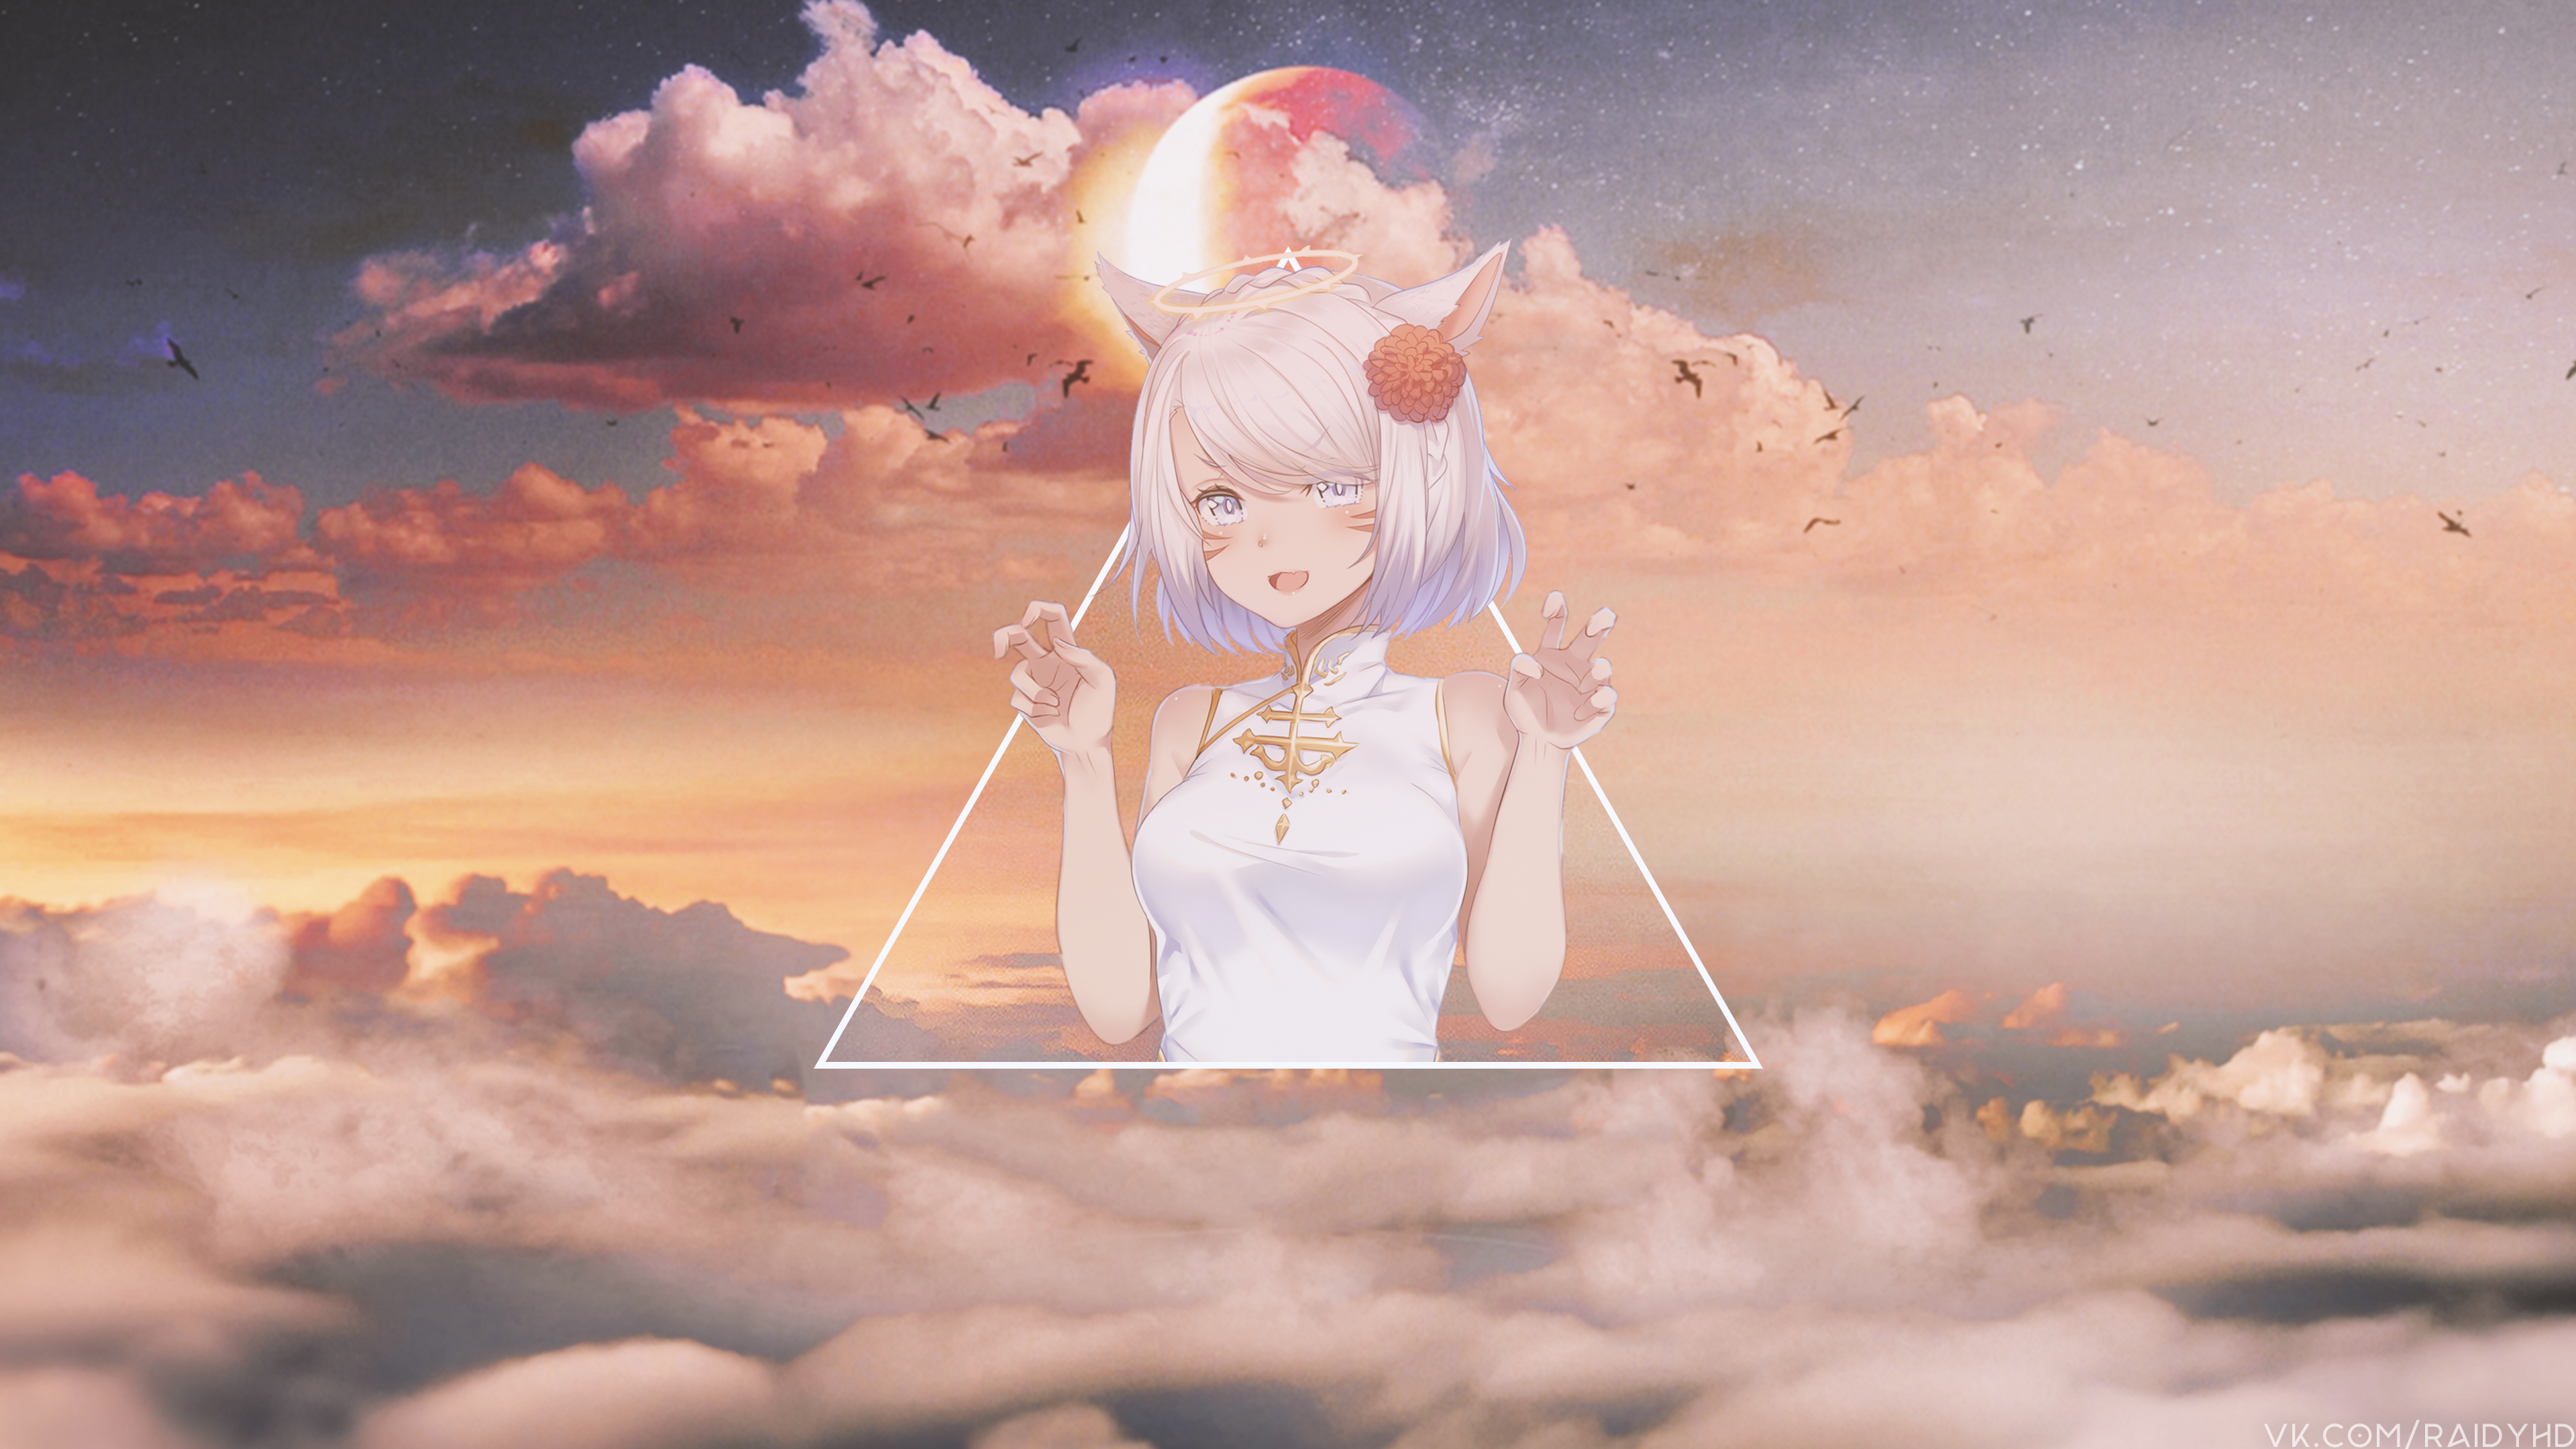 Anime 3840x2160 anime girls anime picture-in-picture animal ears sky